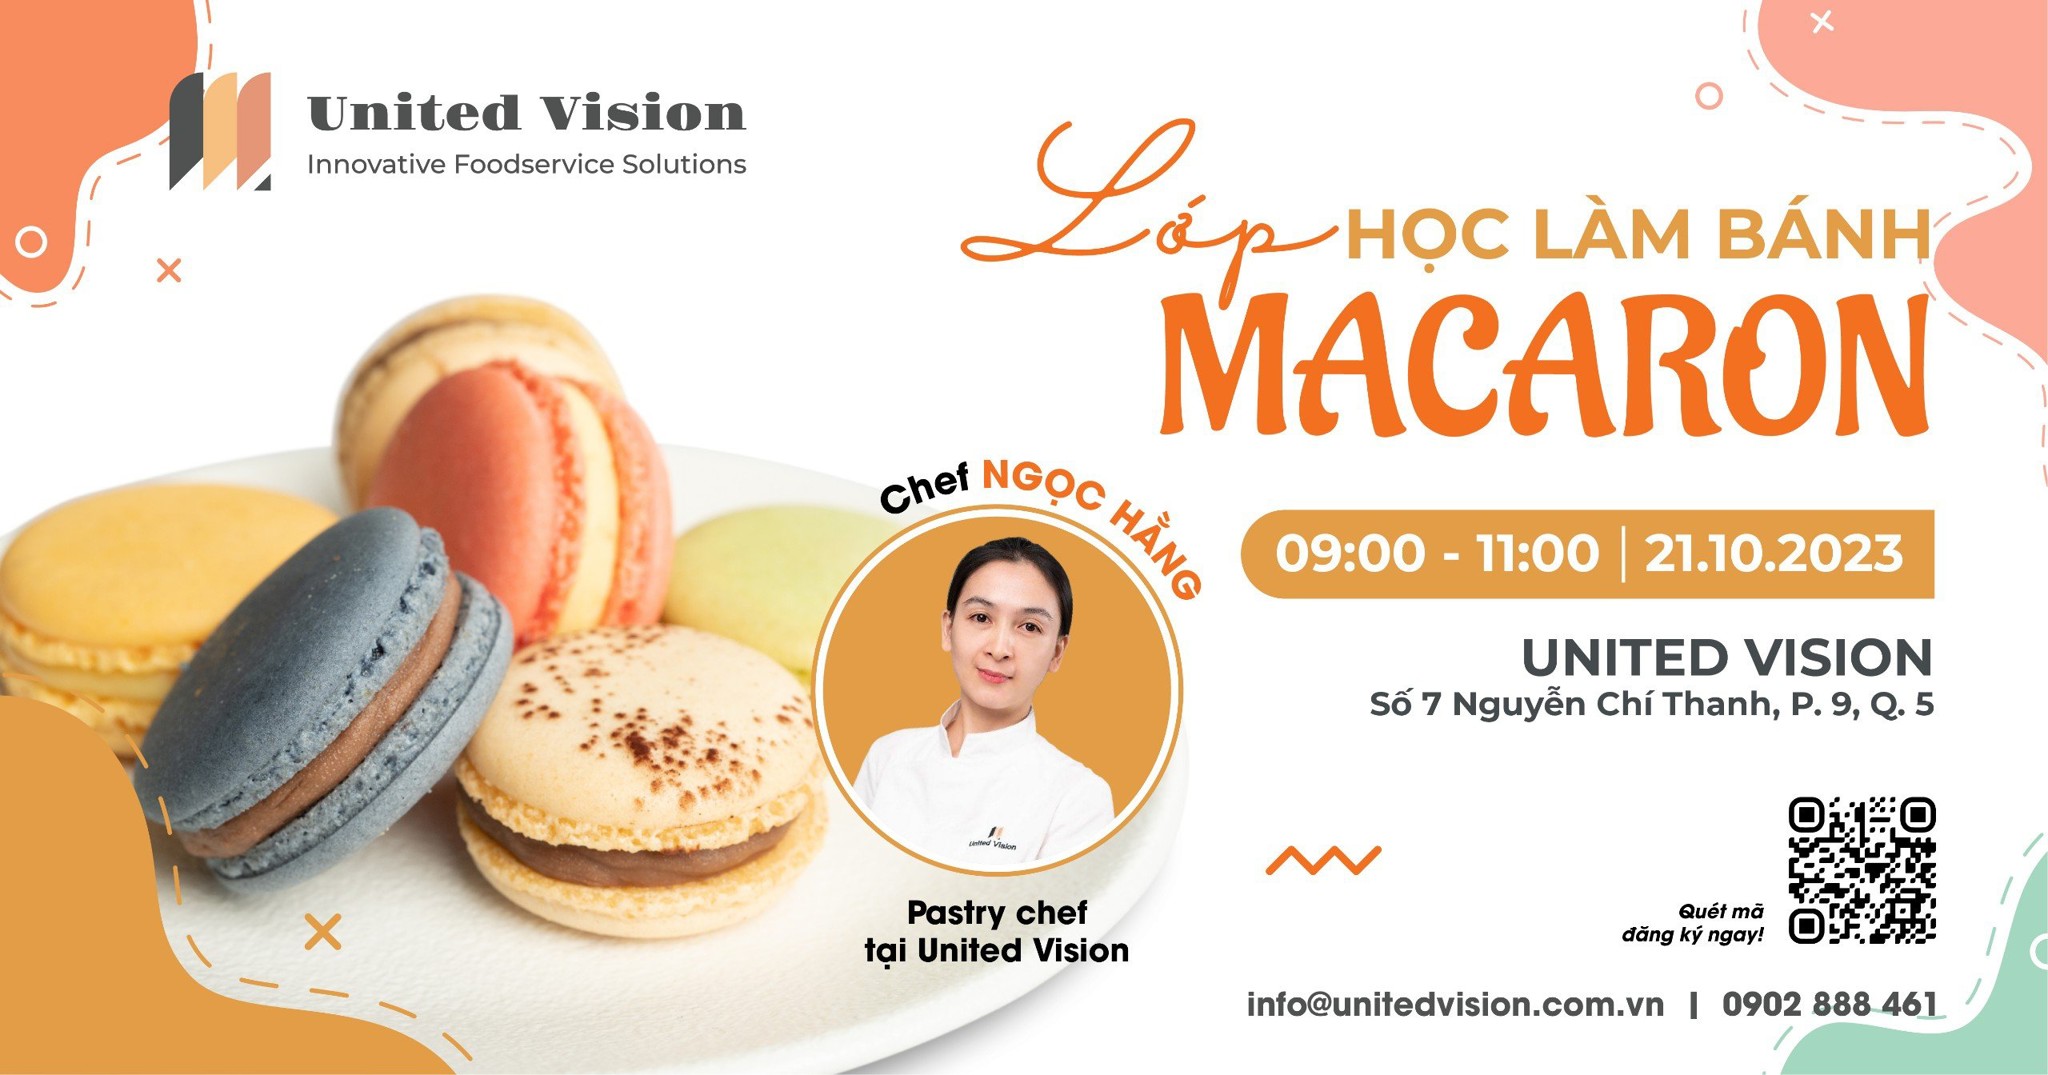 Learn to make macaron at the Macaron Class of United Vision